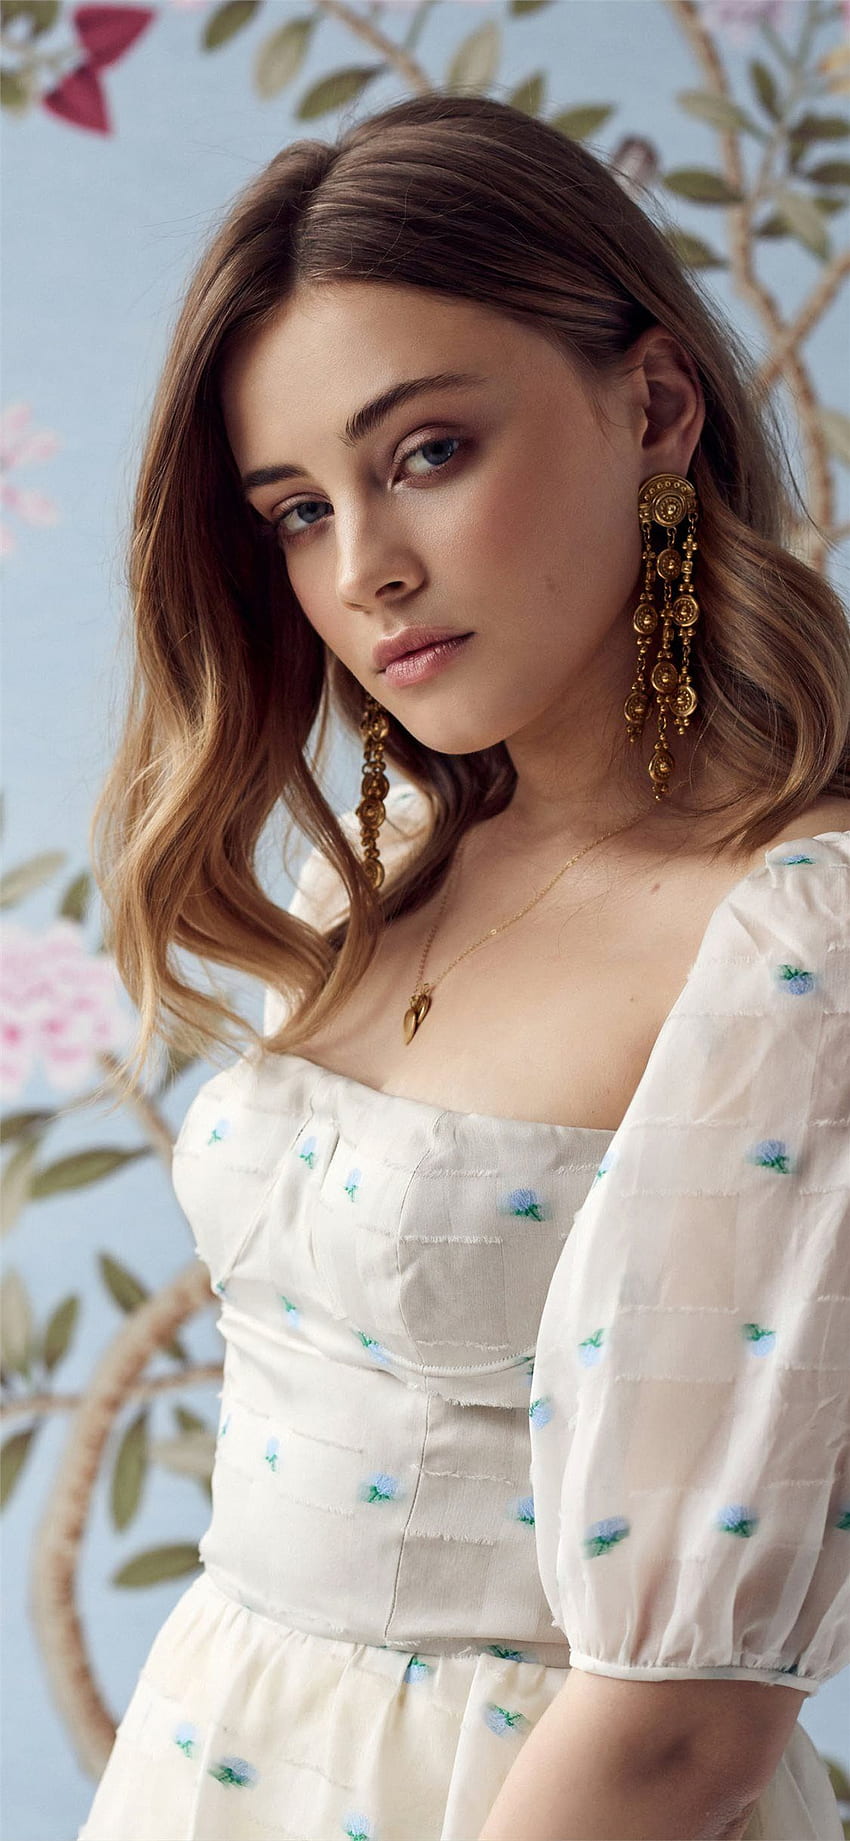 josephine langford rose and ivy hoot 2019 iPhone X HD phone wallpaper